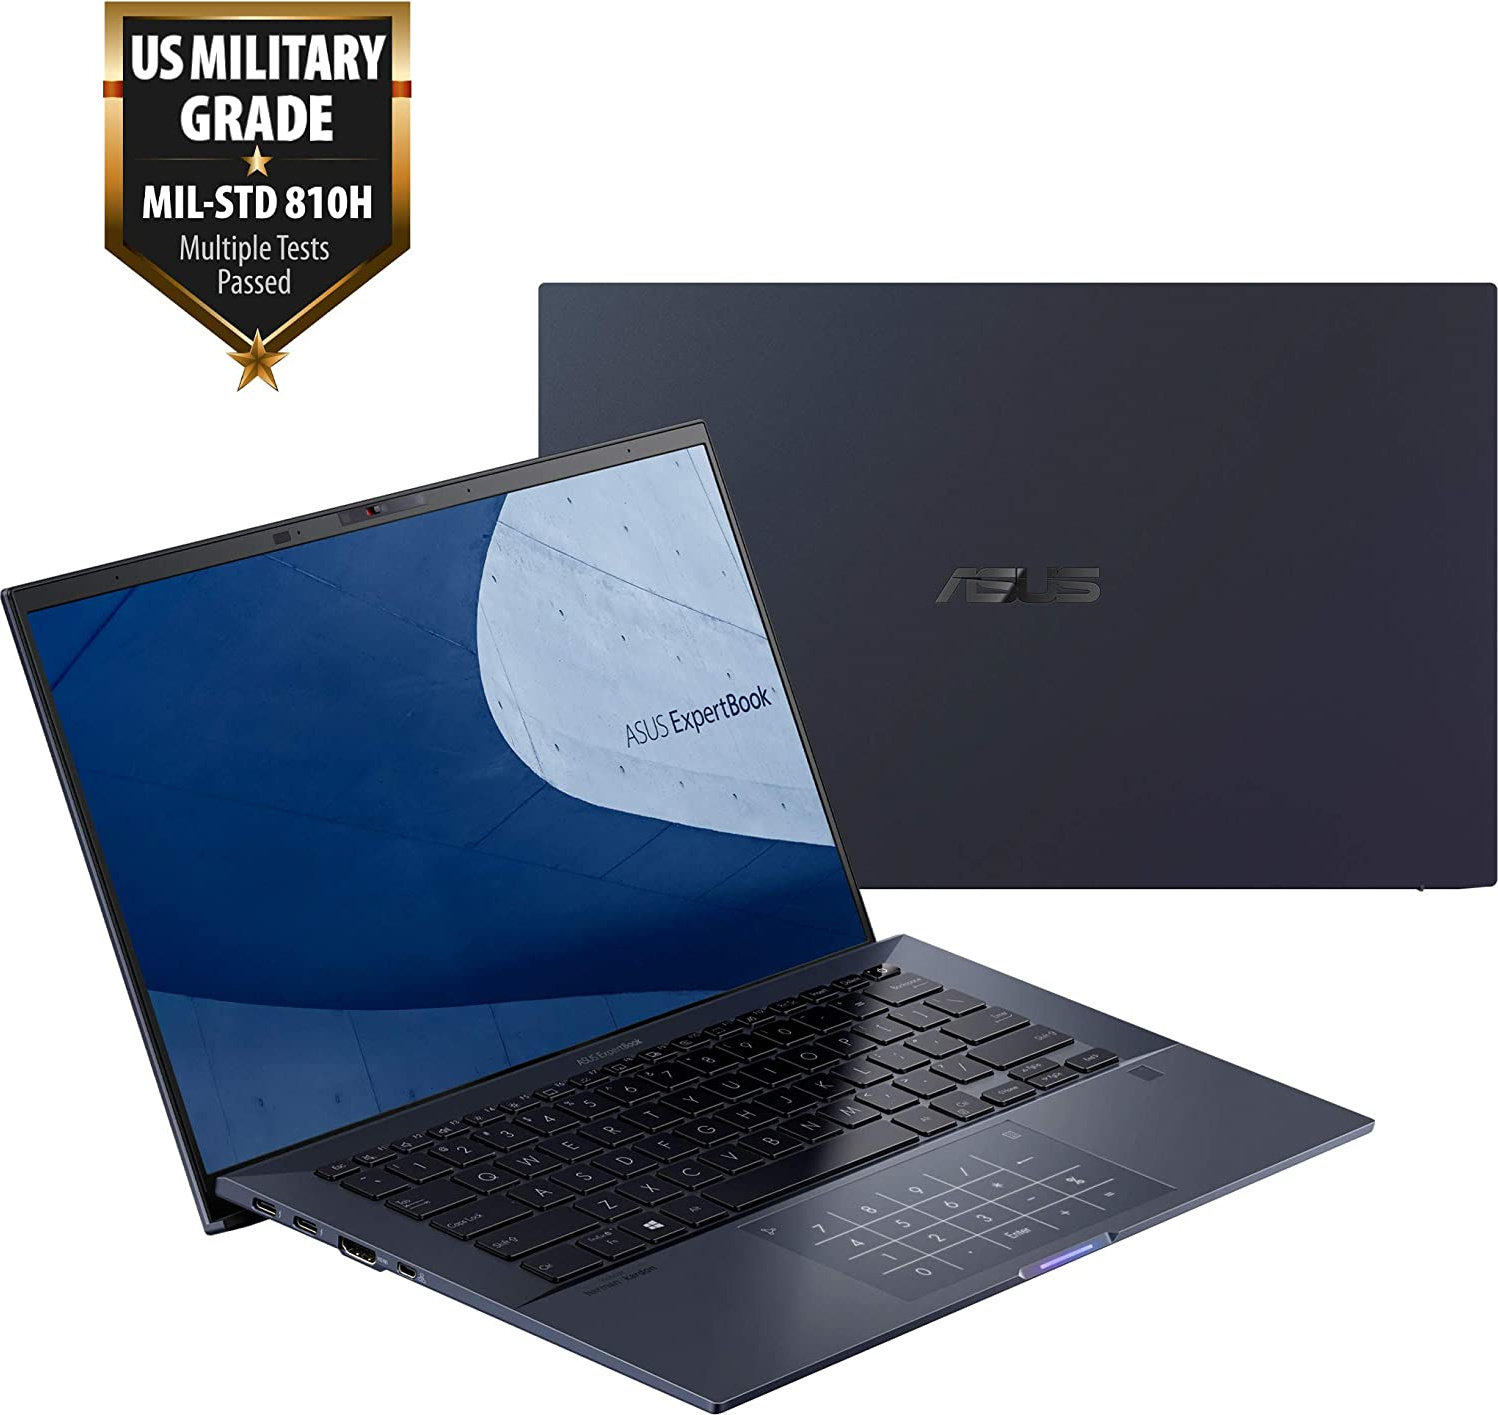 ASUS ExpertBook B9 Thin & Light Business Laptop, 14” FHD Display, Intel Core i7-1165G7 CPU, 1TB SSD, 16GB LPDDRX-RAM, Windows 10 Pro, Up to 17 Hrs-Battery Life-Sleeve, B9450CEA-XH75